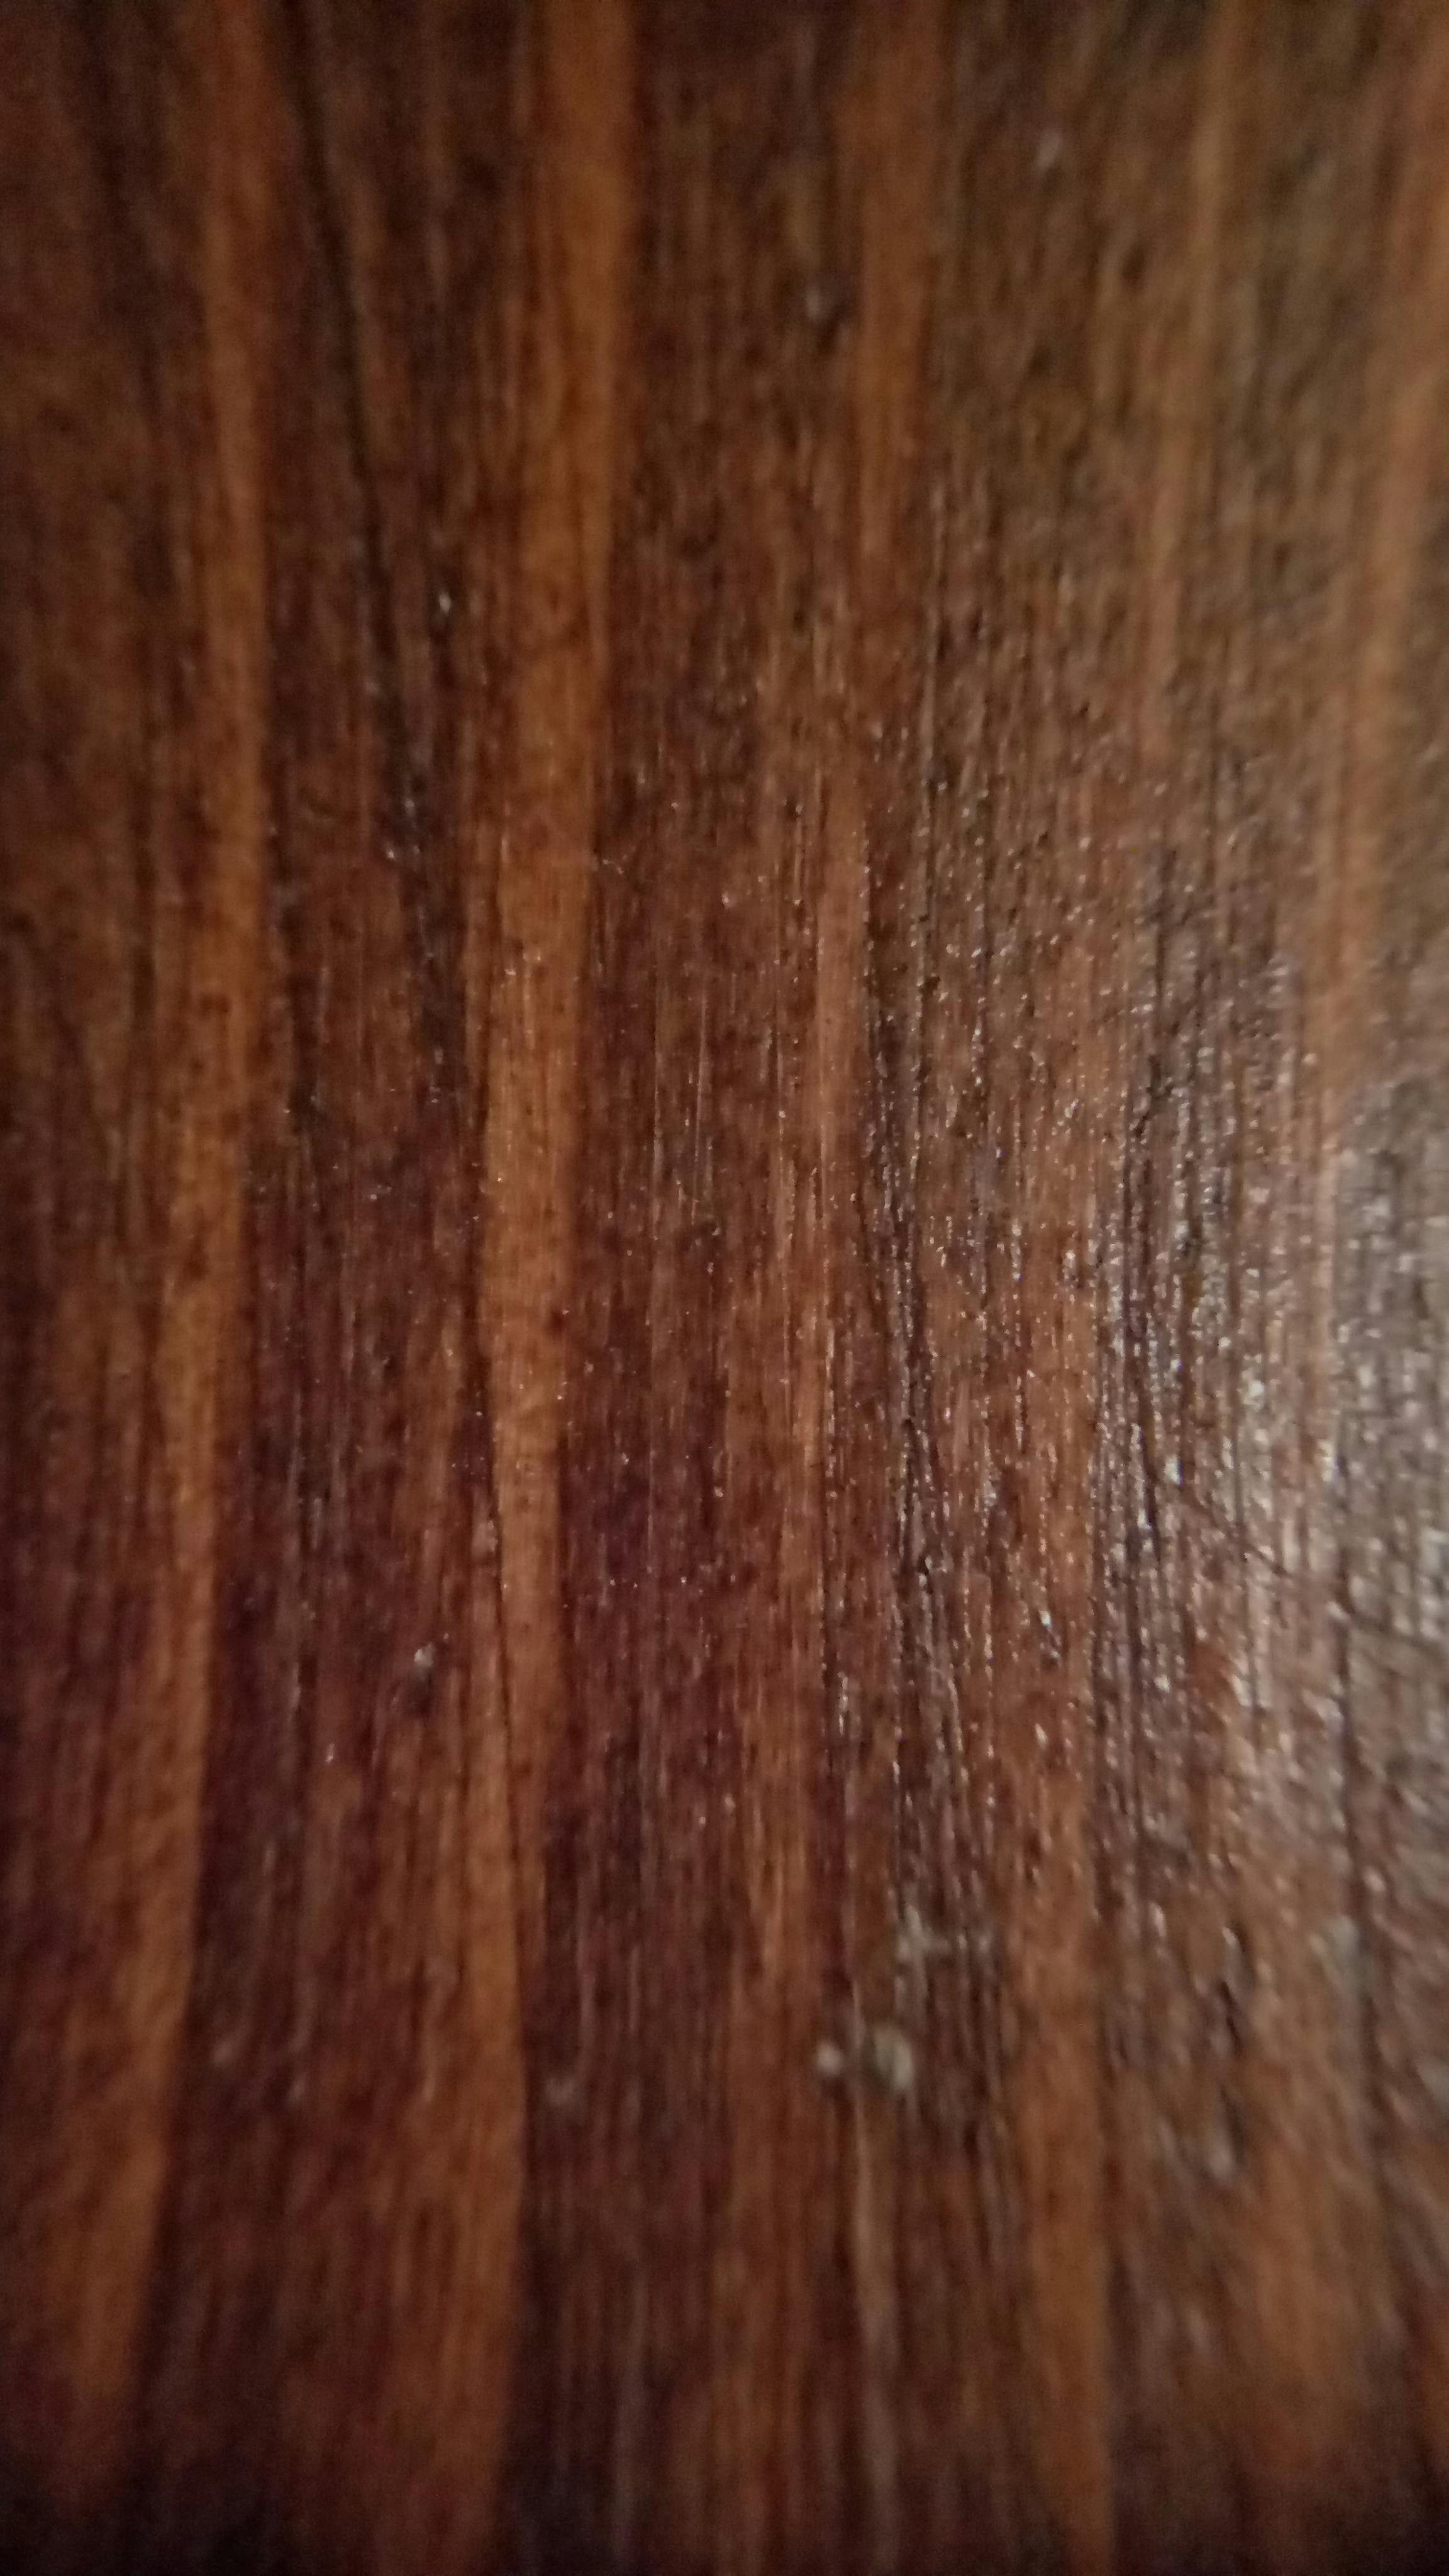 Free stock photo of microphotography, wood, wood grain